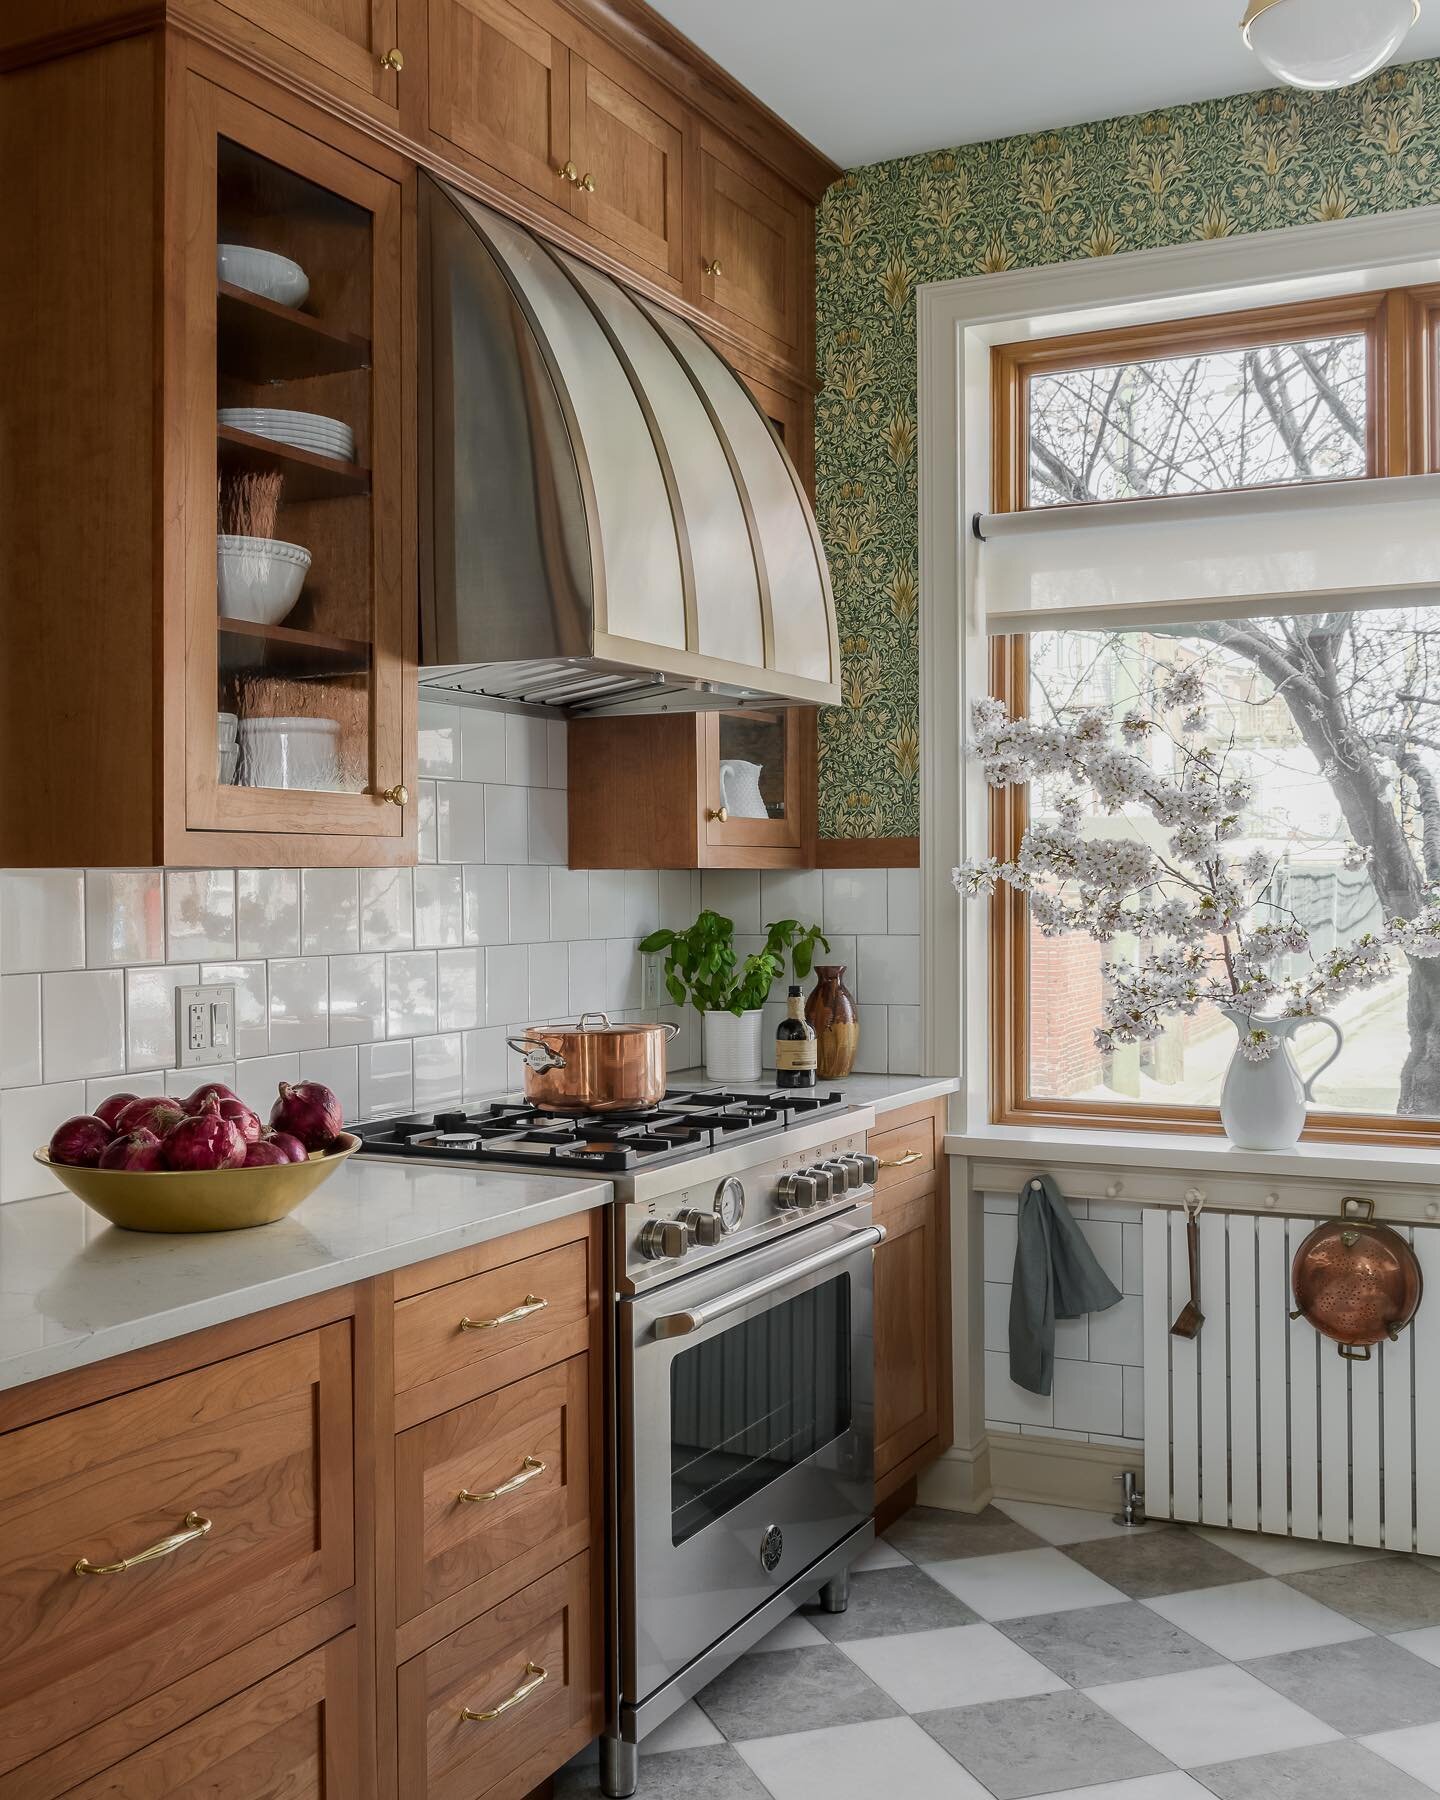 Some more views of this beautiful kitchen, filled with so much warmth and character.

Design: @airy_kitchens 
📸: @meghanbalcomphotography 

#kitchendesign #kitchendecor #kitchengoals #kitcheninspo #kitcheninspiration #kitcheninterior #philadelphiade